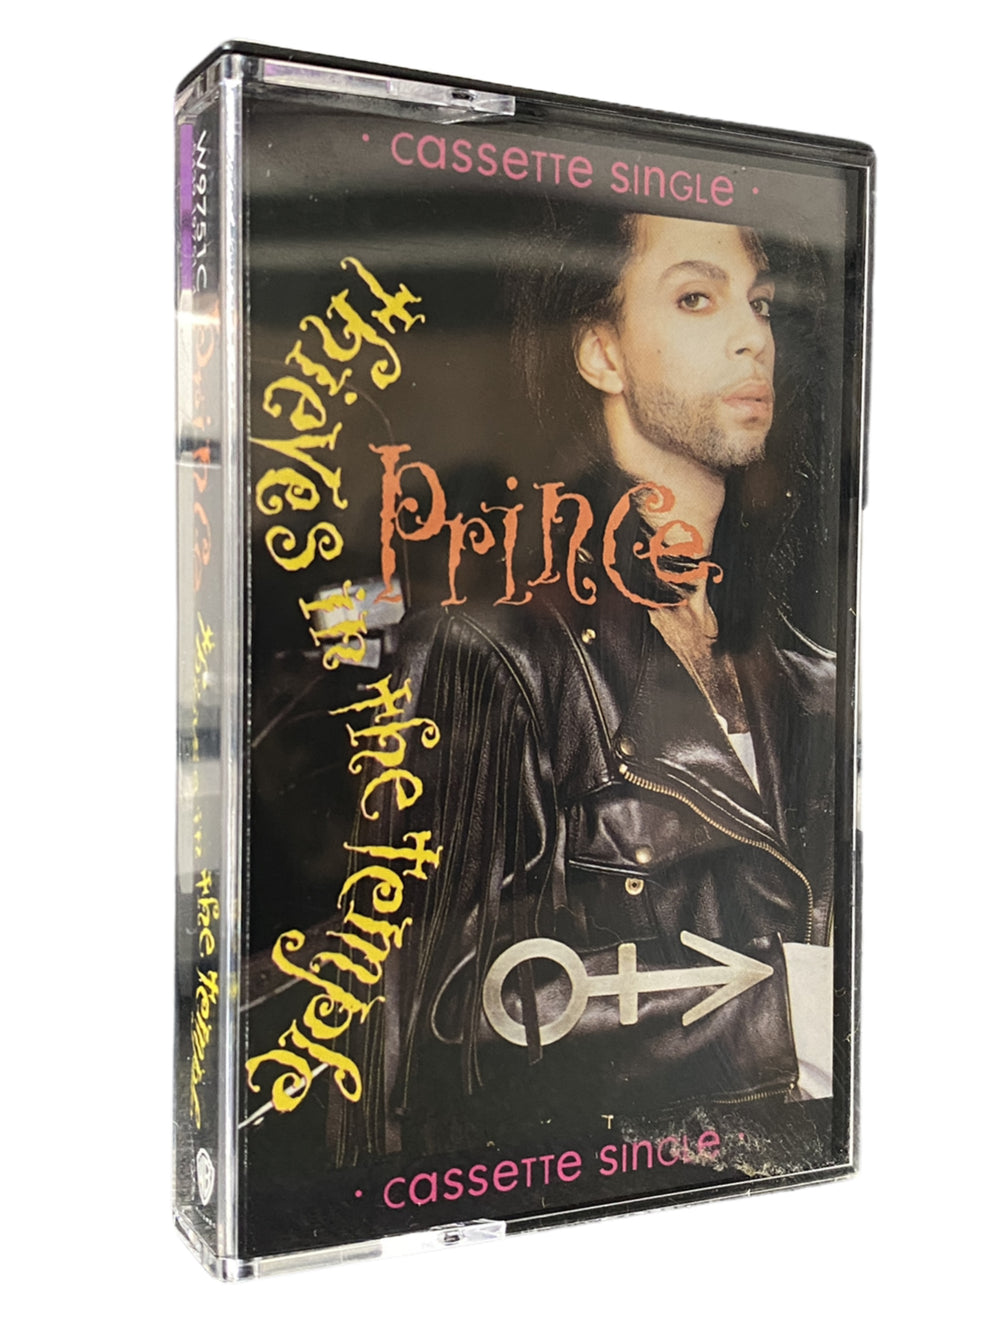 Prince Thieves In The Temple Original UK Cassette Tape Single SMS1